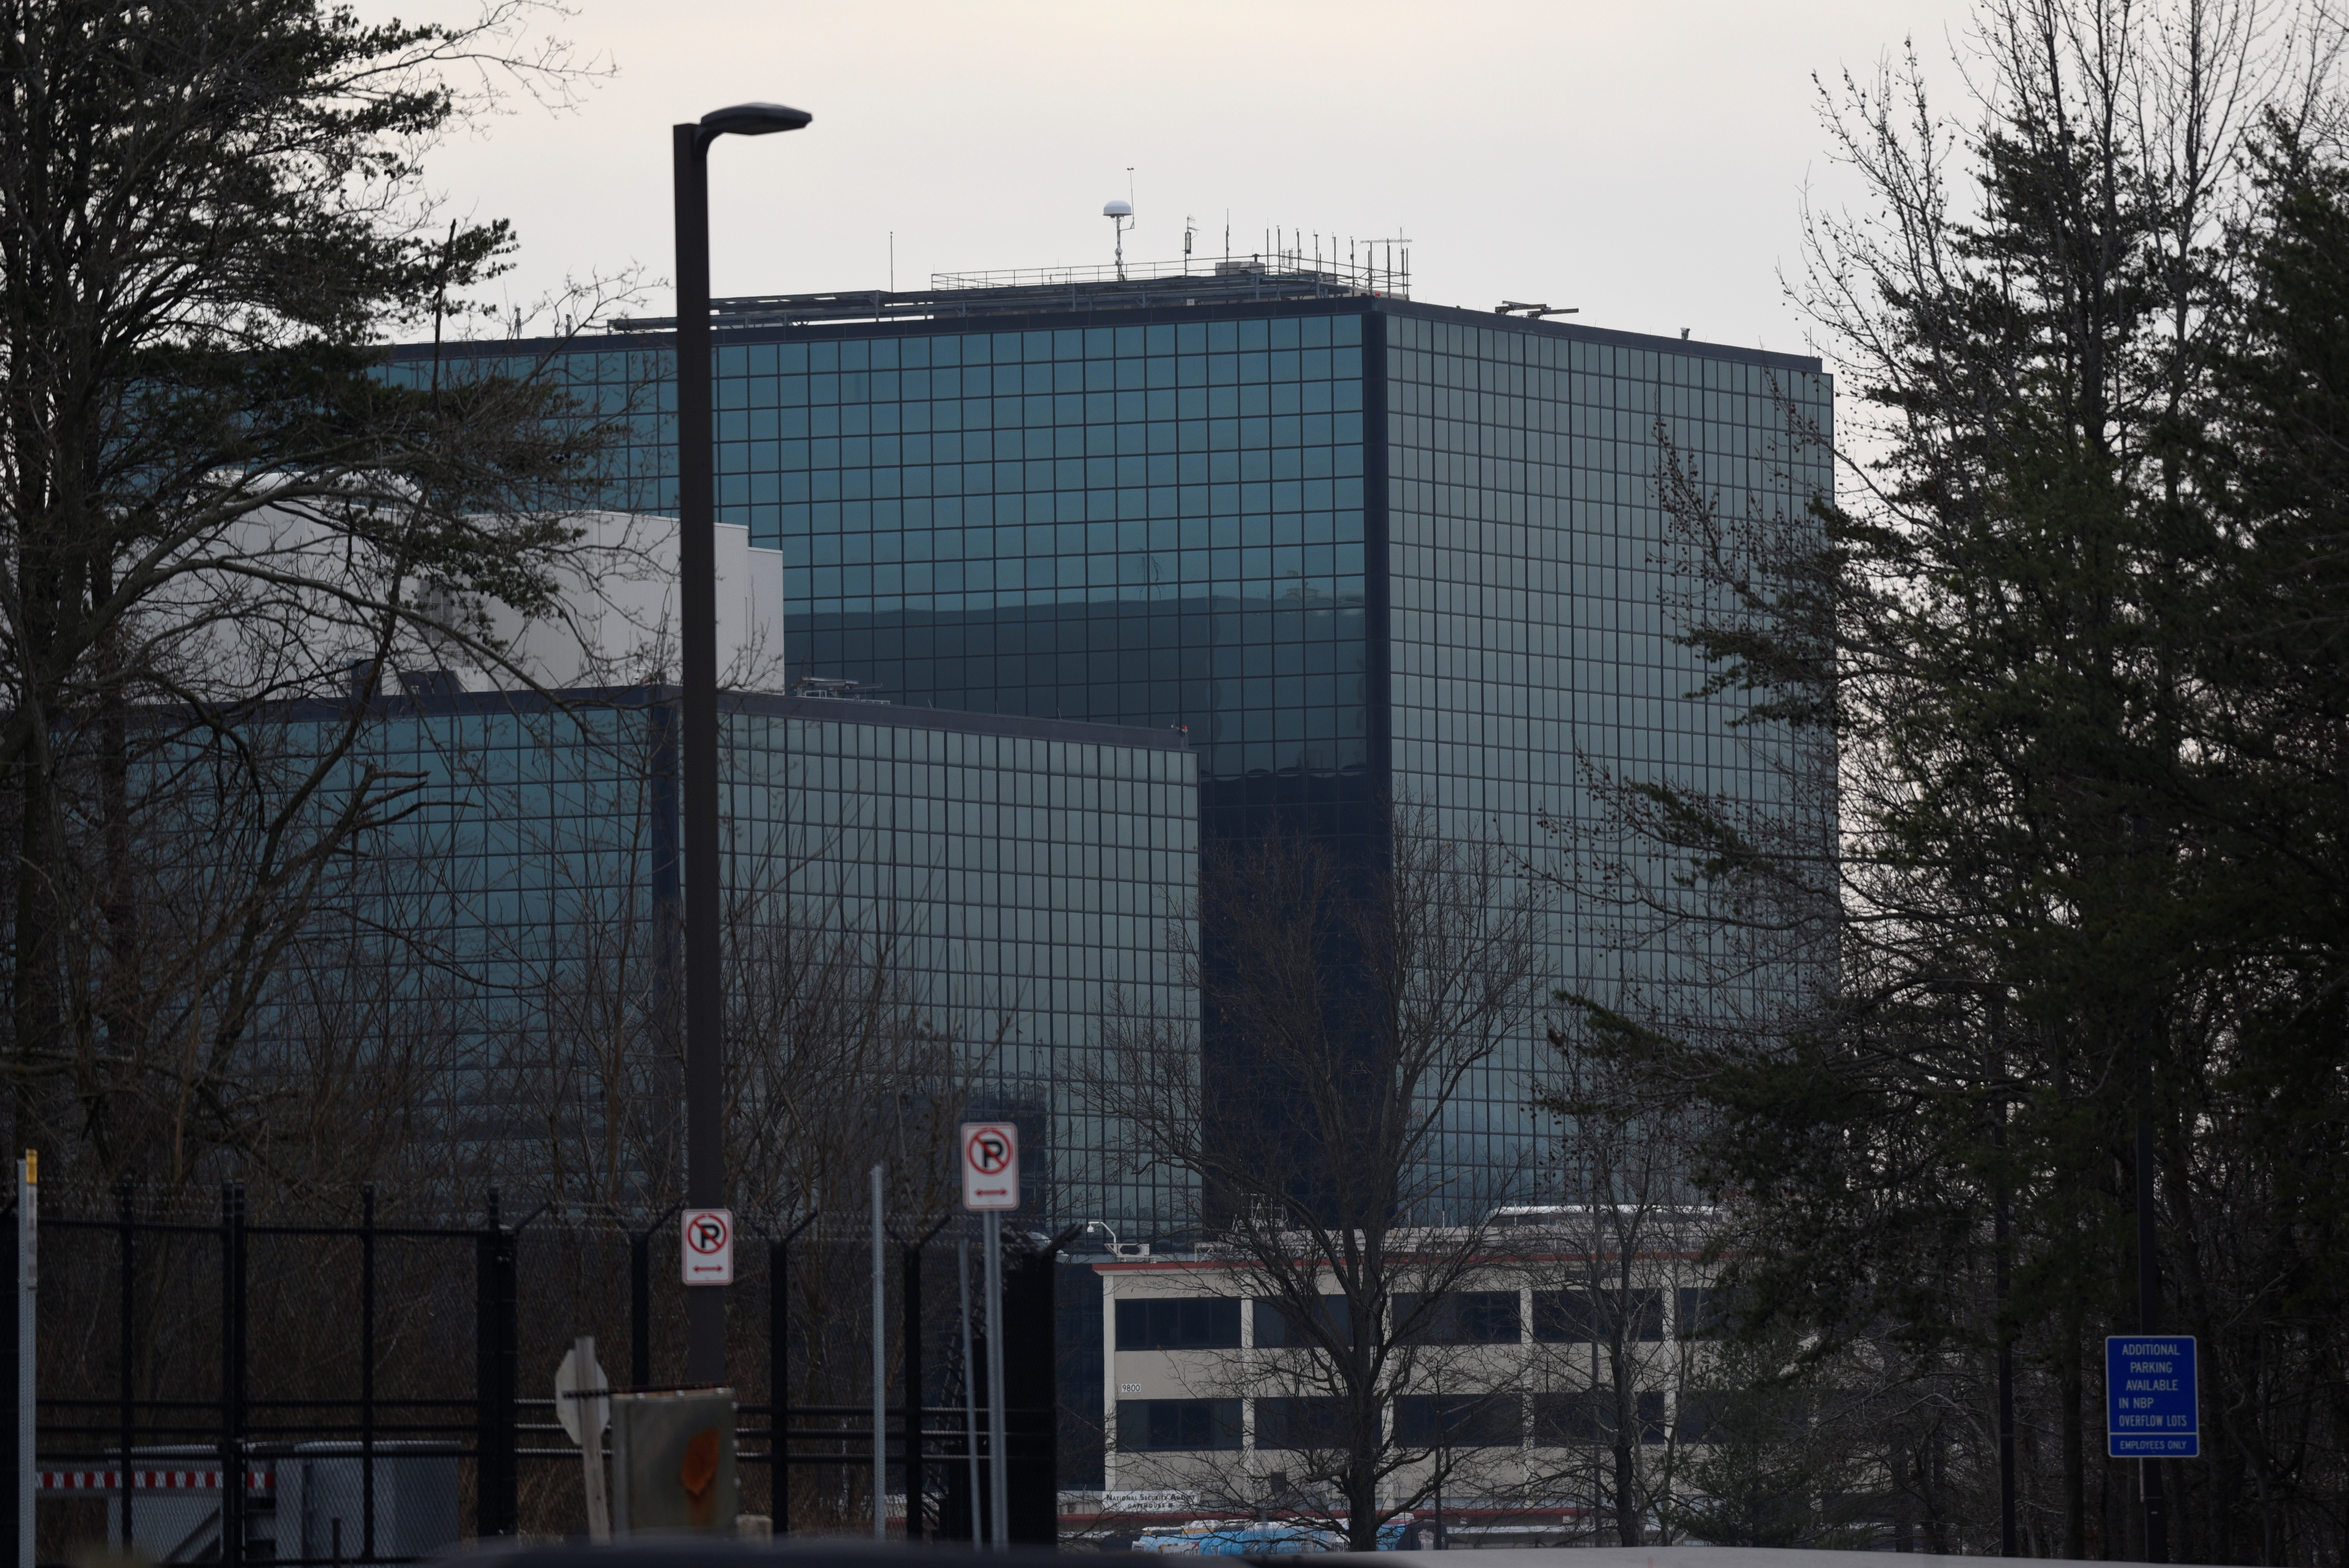 The National Security Agency (NSA) headquarters is seen in Fort Meade, Maryland, U.S. February 14, 2018. REUTERS/Sait Serkan Gurbuz